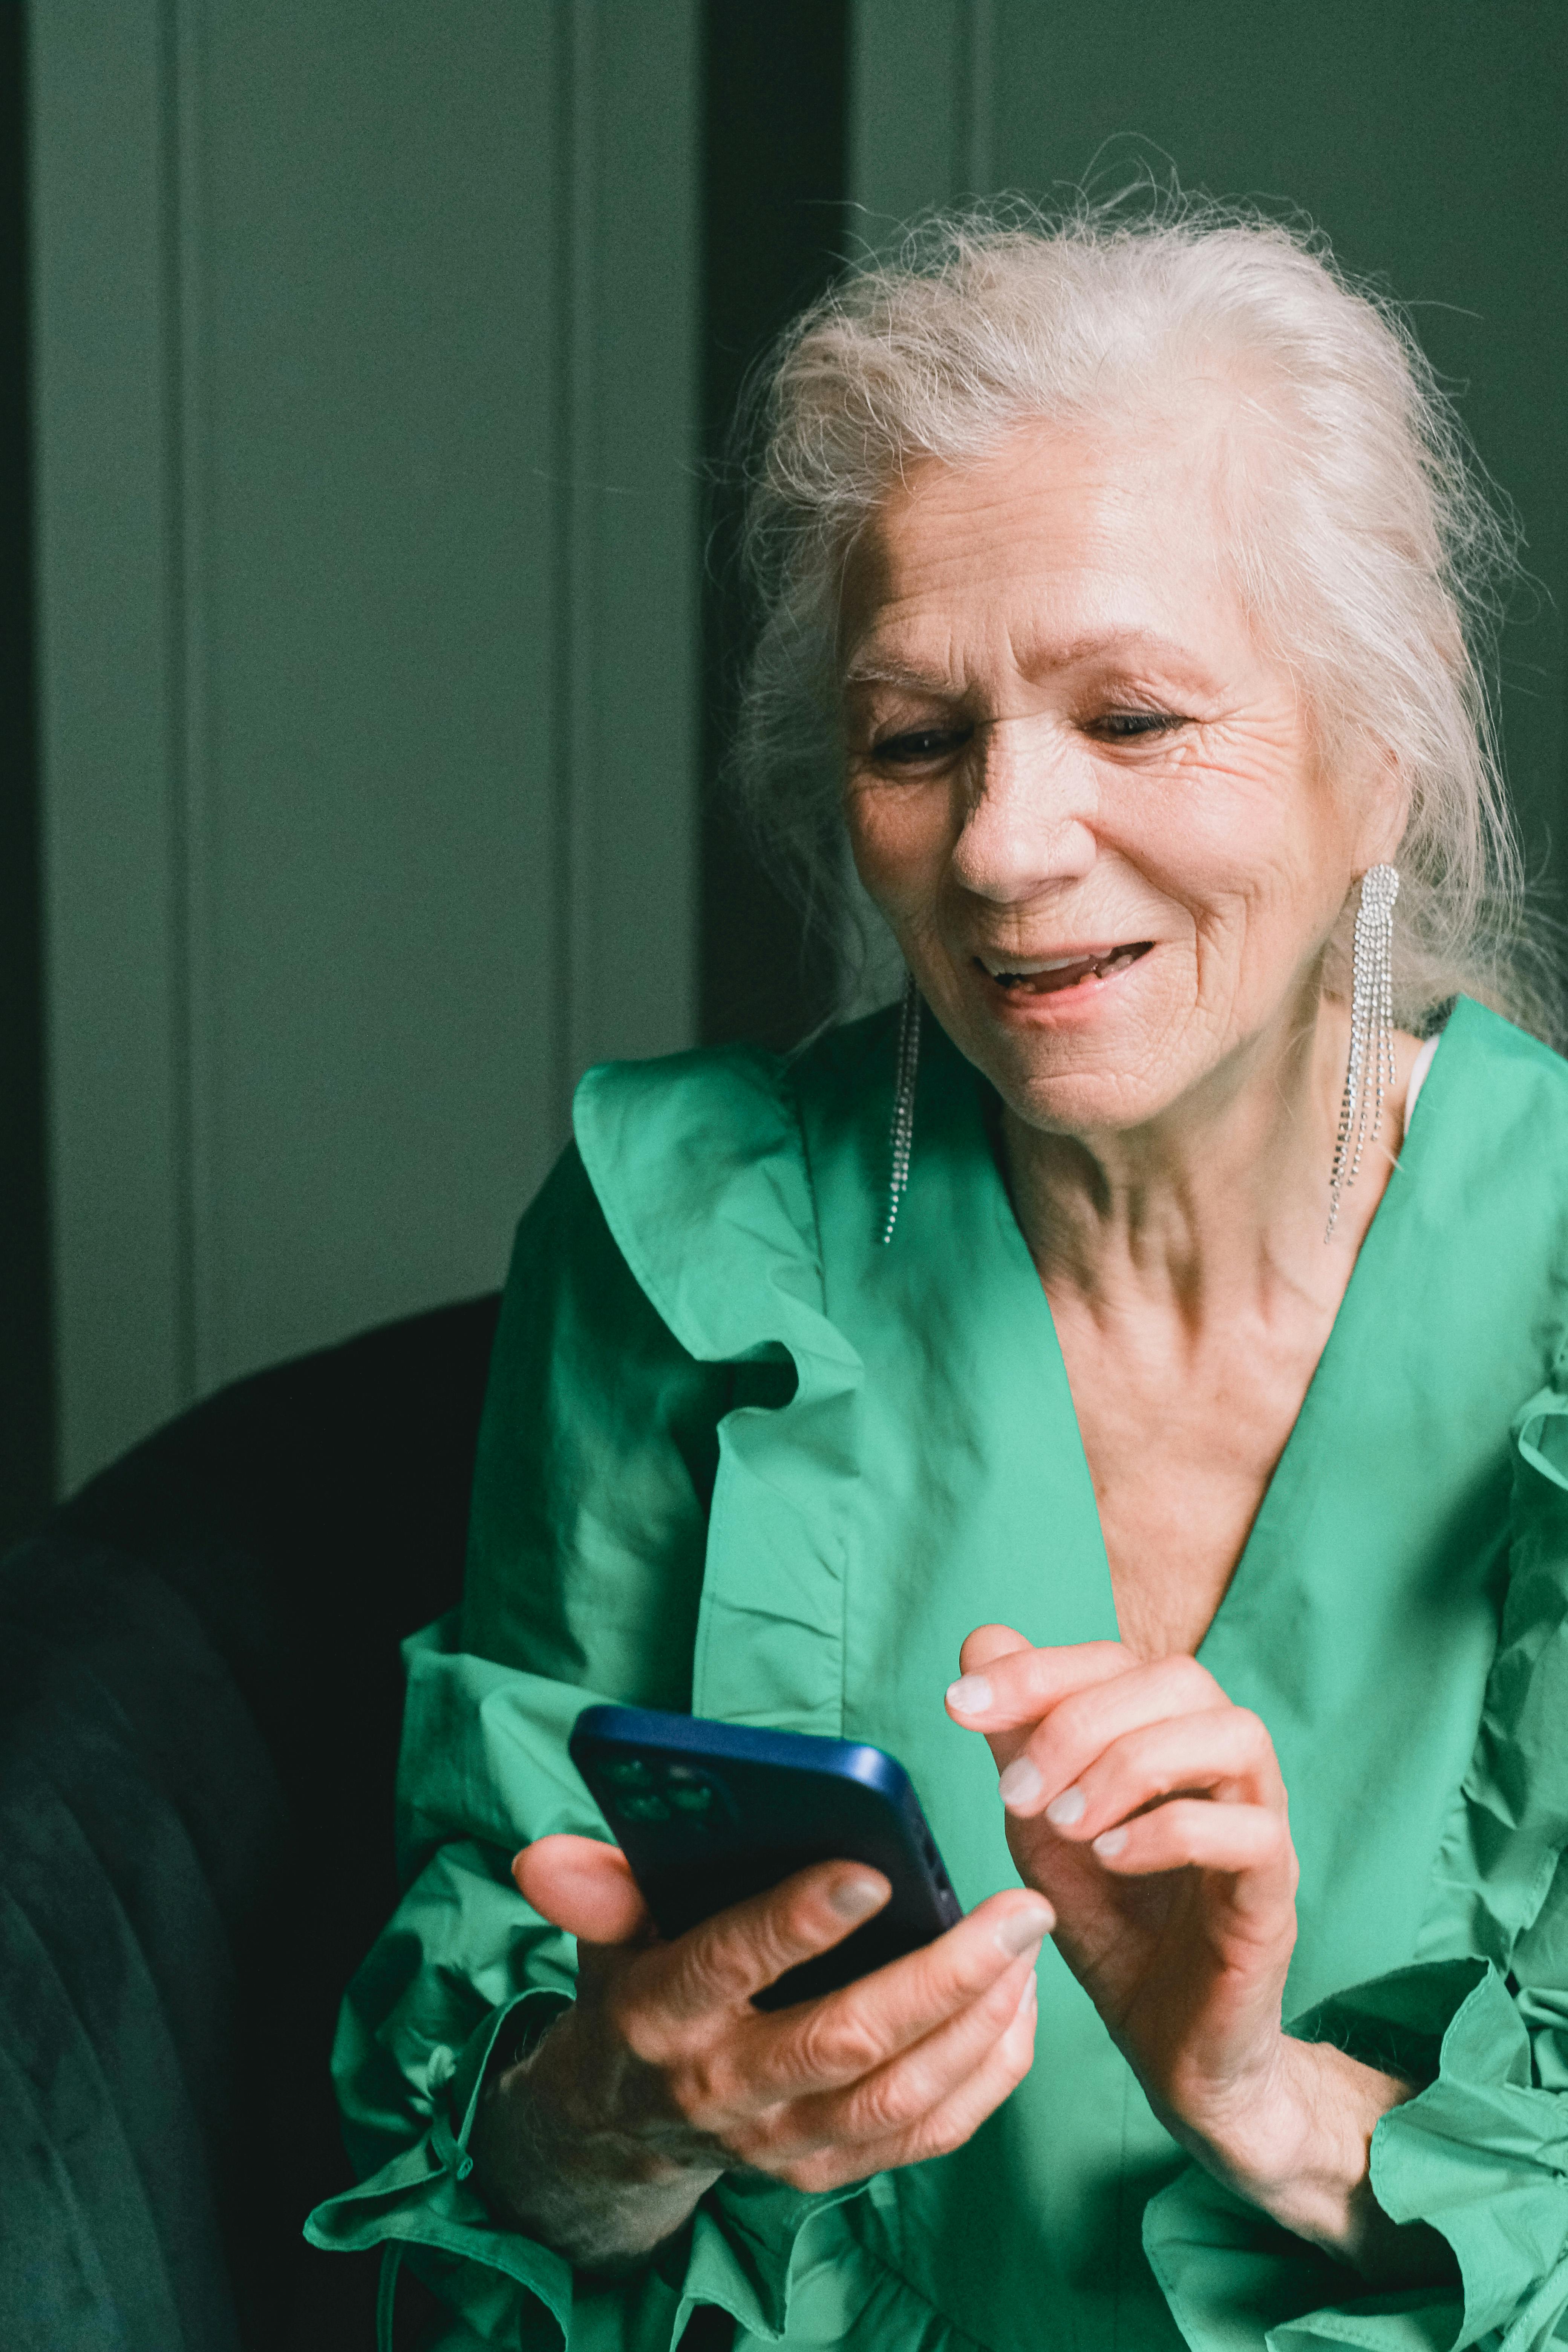 An older woman smiling while using a phone | Source: Pexels